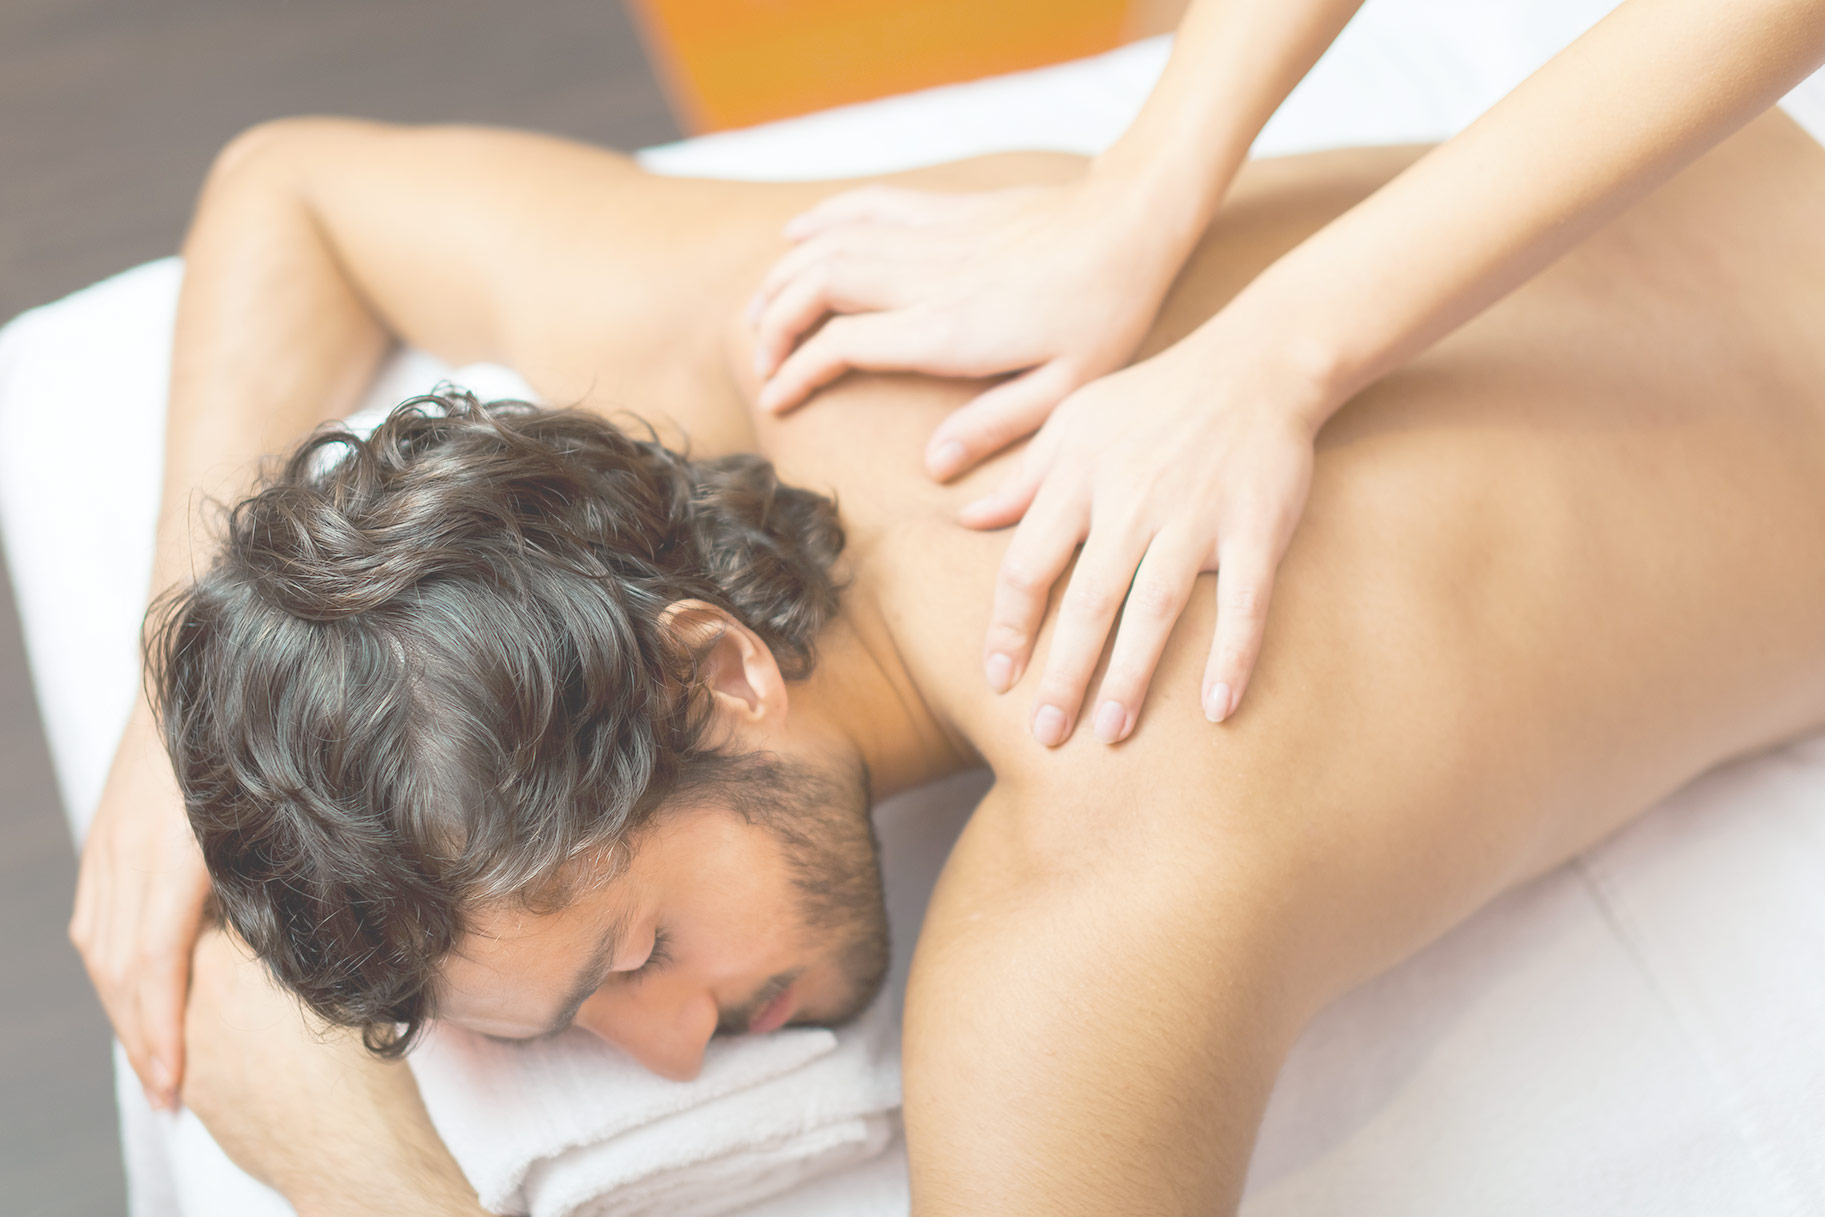 where to get a massage with happy ending